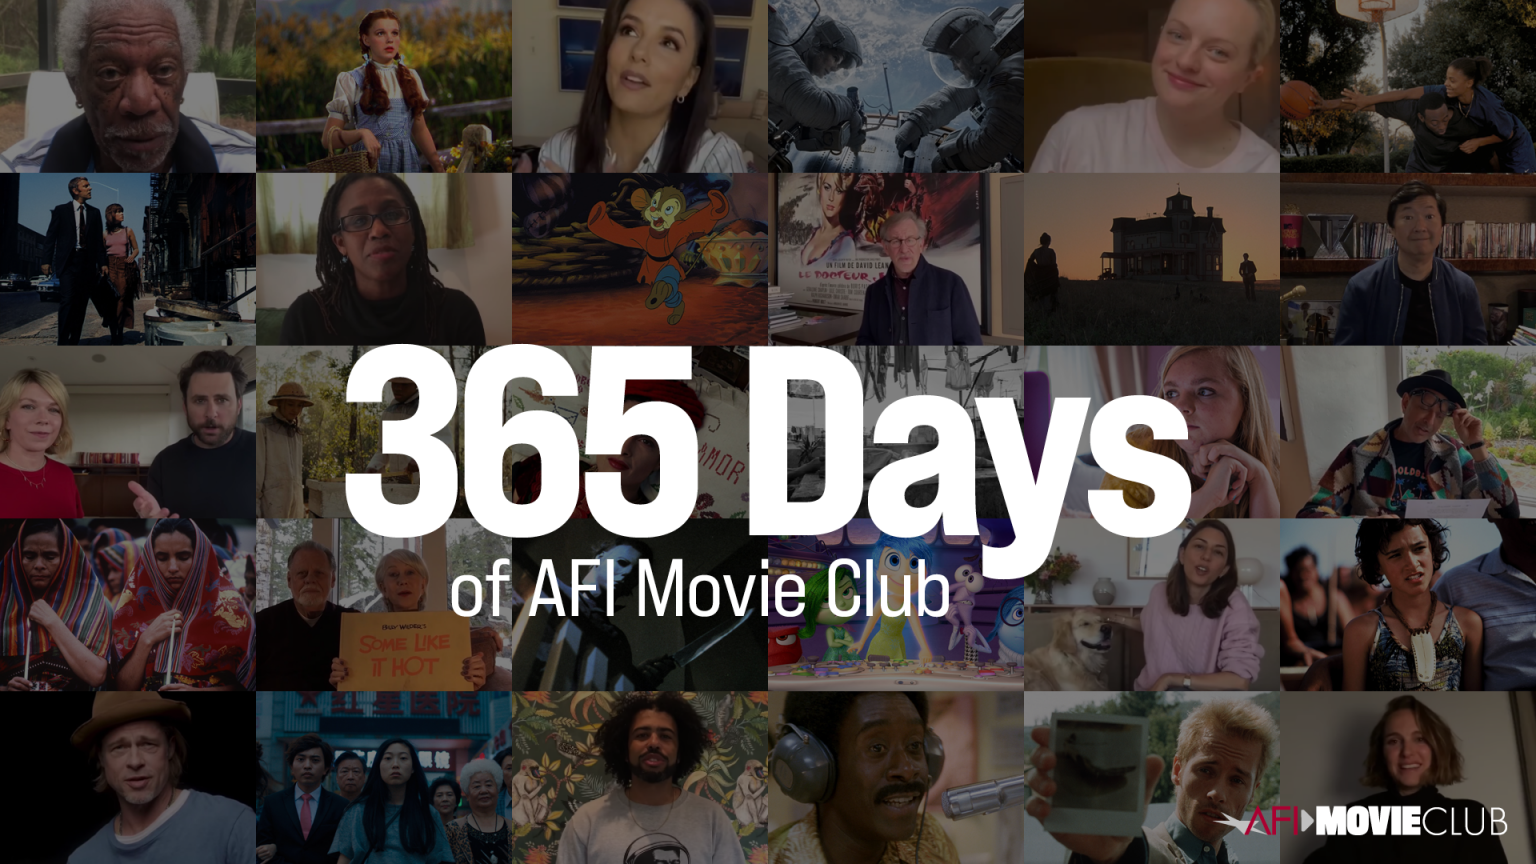 AFI Movie Club 365 Days of Watching Movies Together American Film